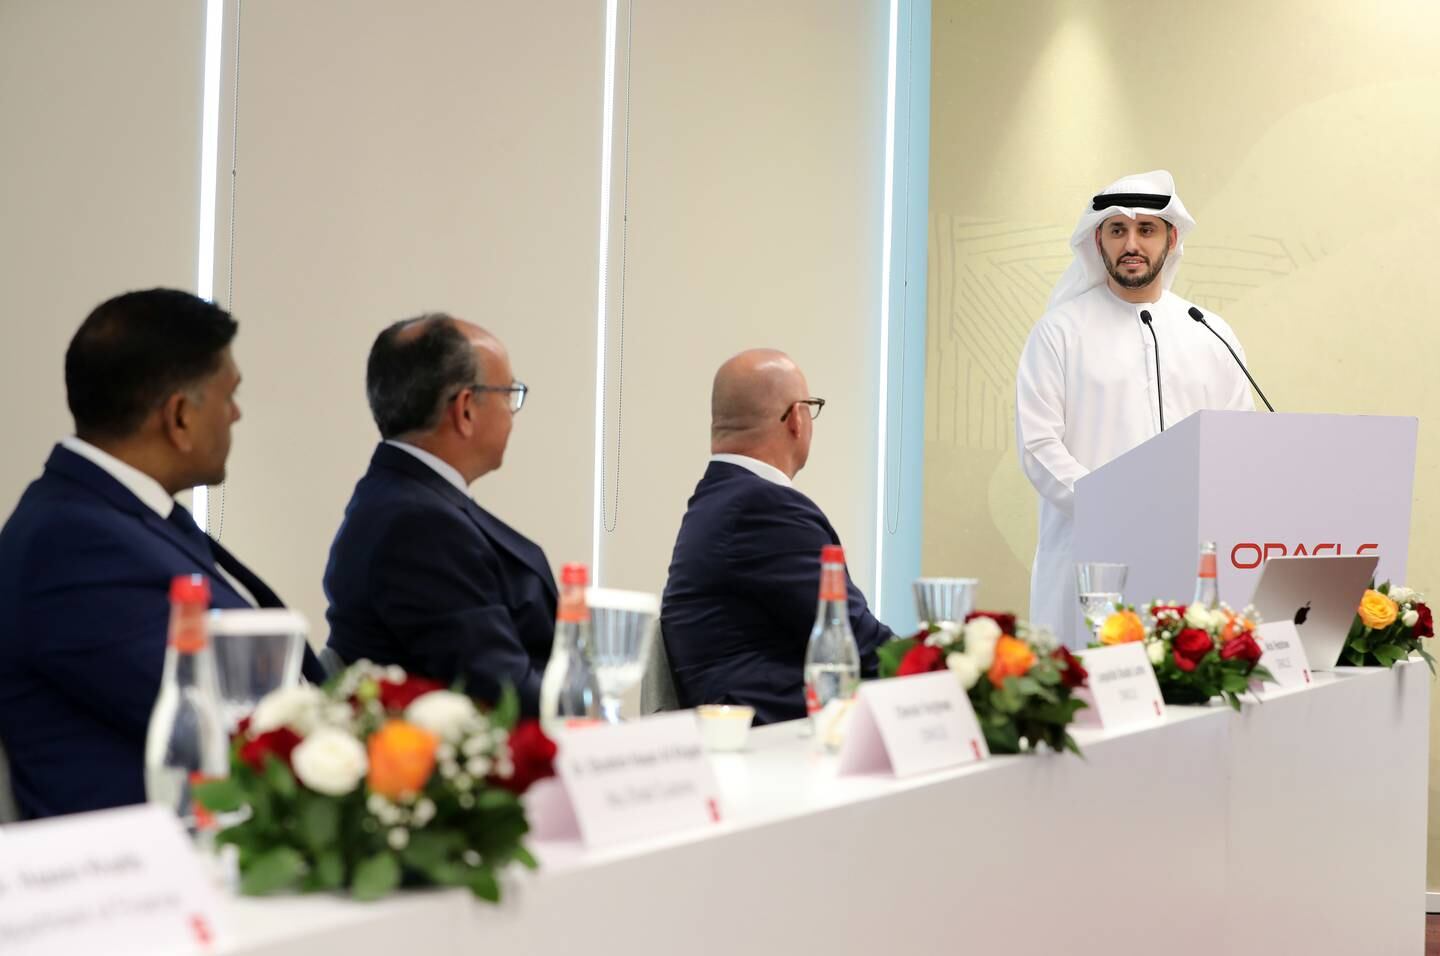 Mohamed Al Askar, director general of the Abu Dhabi Digital Authority, delivering a keynote at the inauguration of Oracle's new innovation hub in Abu Dhabi on Wednesday. Chris Whiteoak / The National